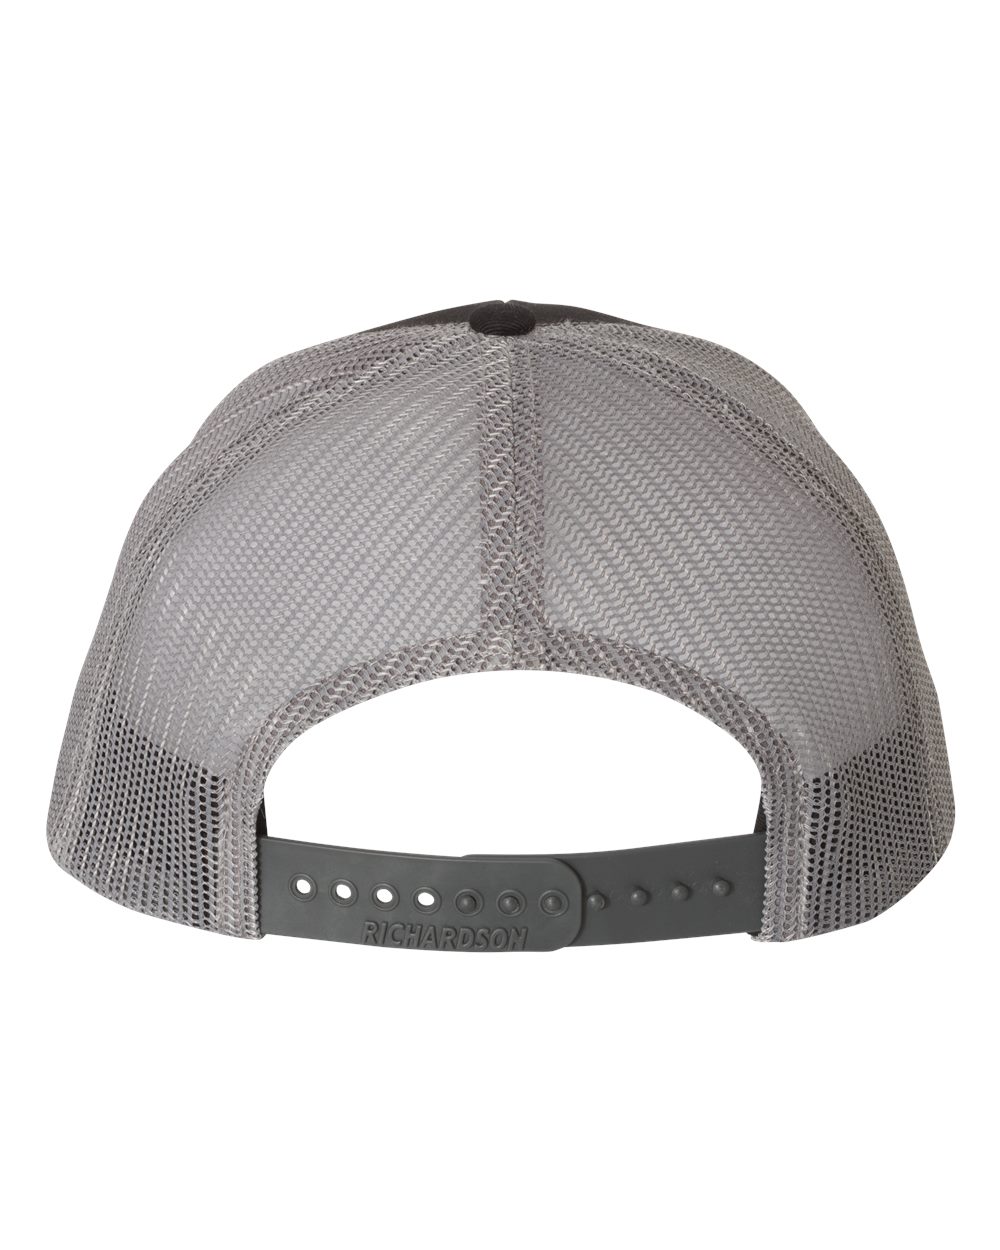 Image of the Kelly Hughes Stateline Richardson Cap in Black/Charcoal, featuring a dark brown patch and integrated ID slot, perfect for showcasing style and convenience at events with durable construction and a comfortable fit.